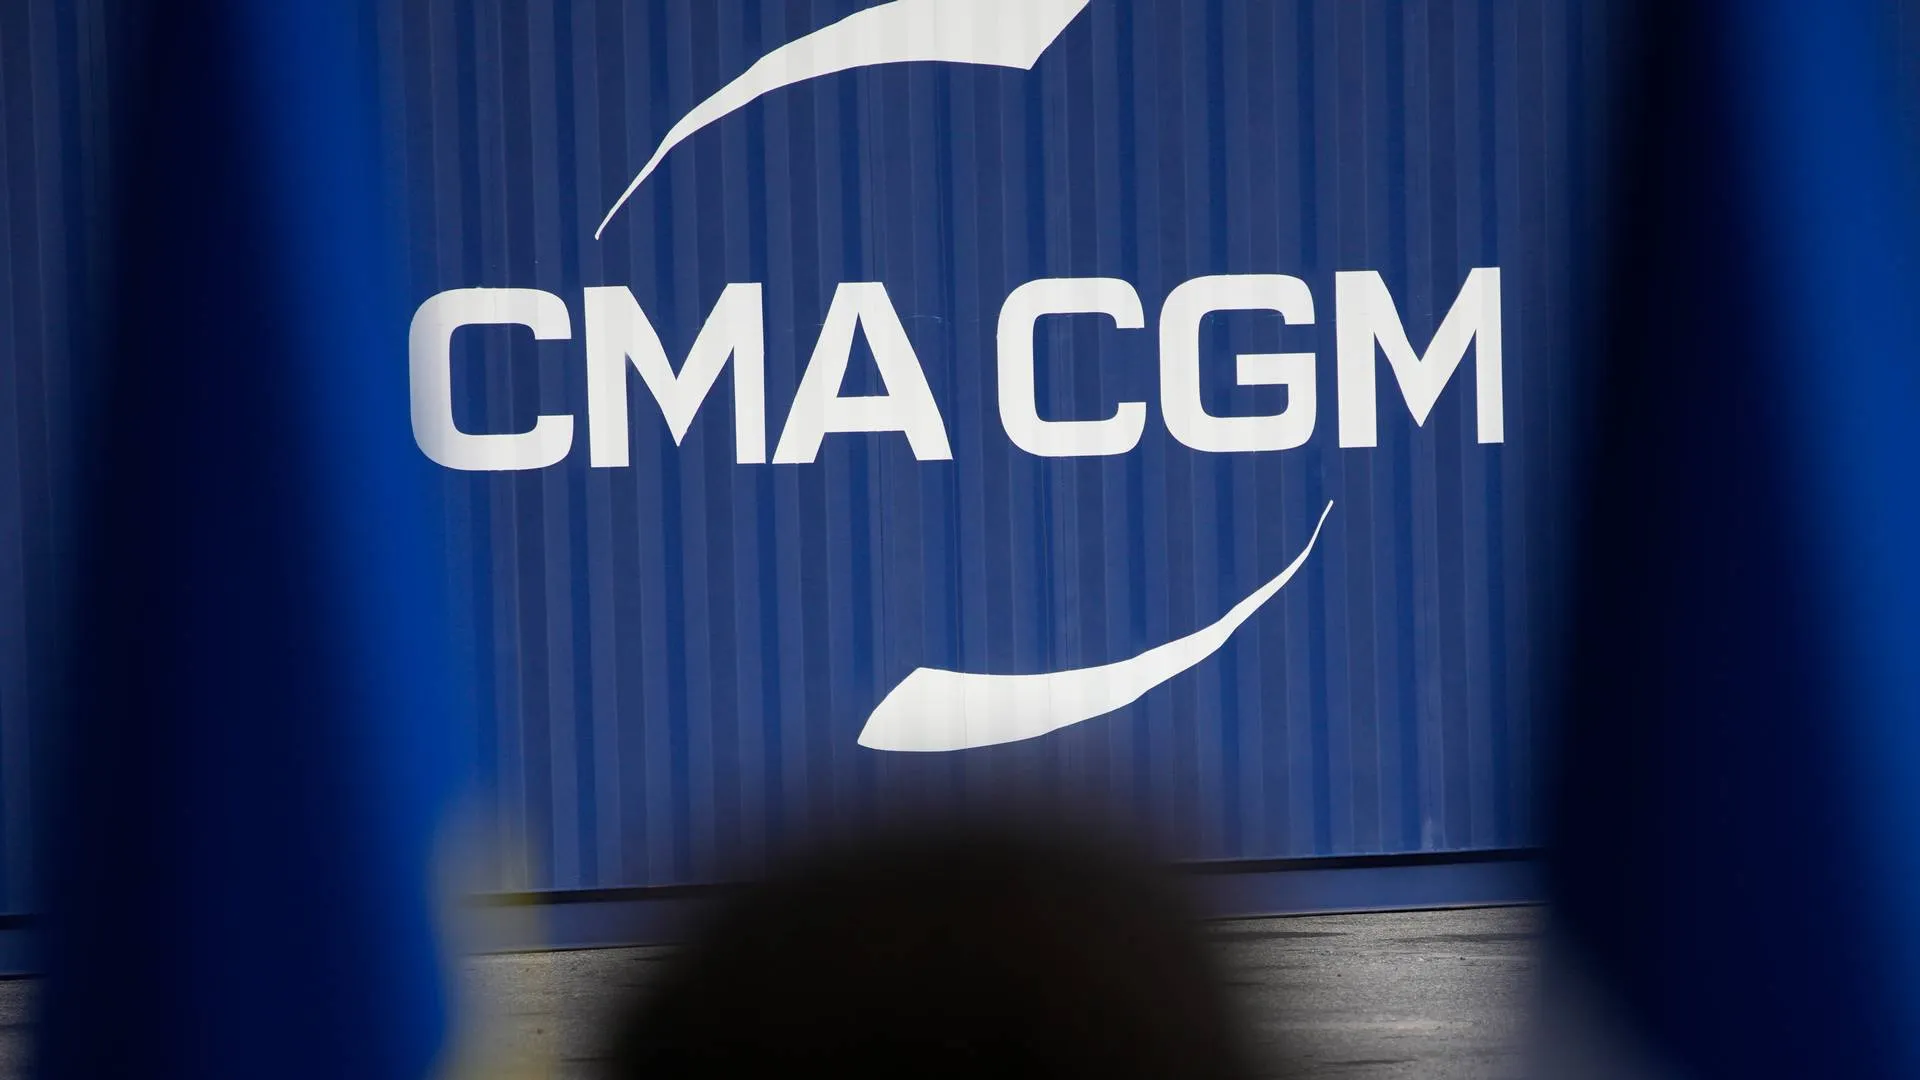 Report: CMA CGM vessel was intended target for ballistic missiles